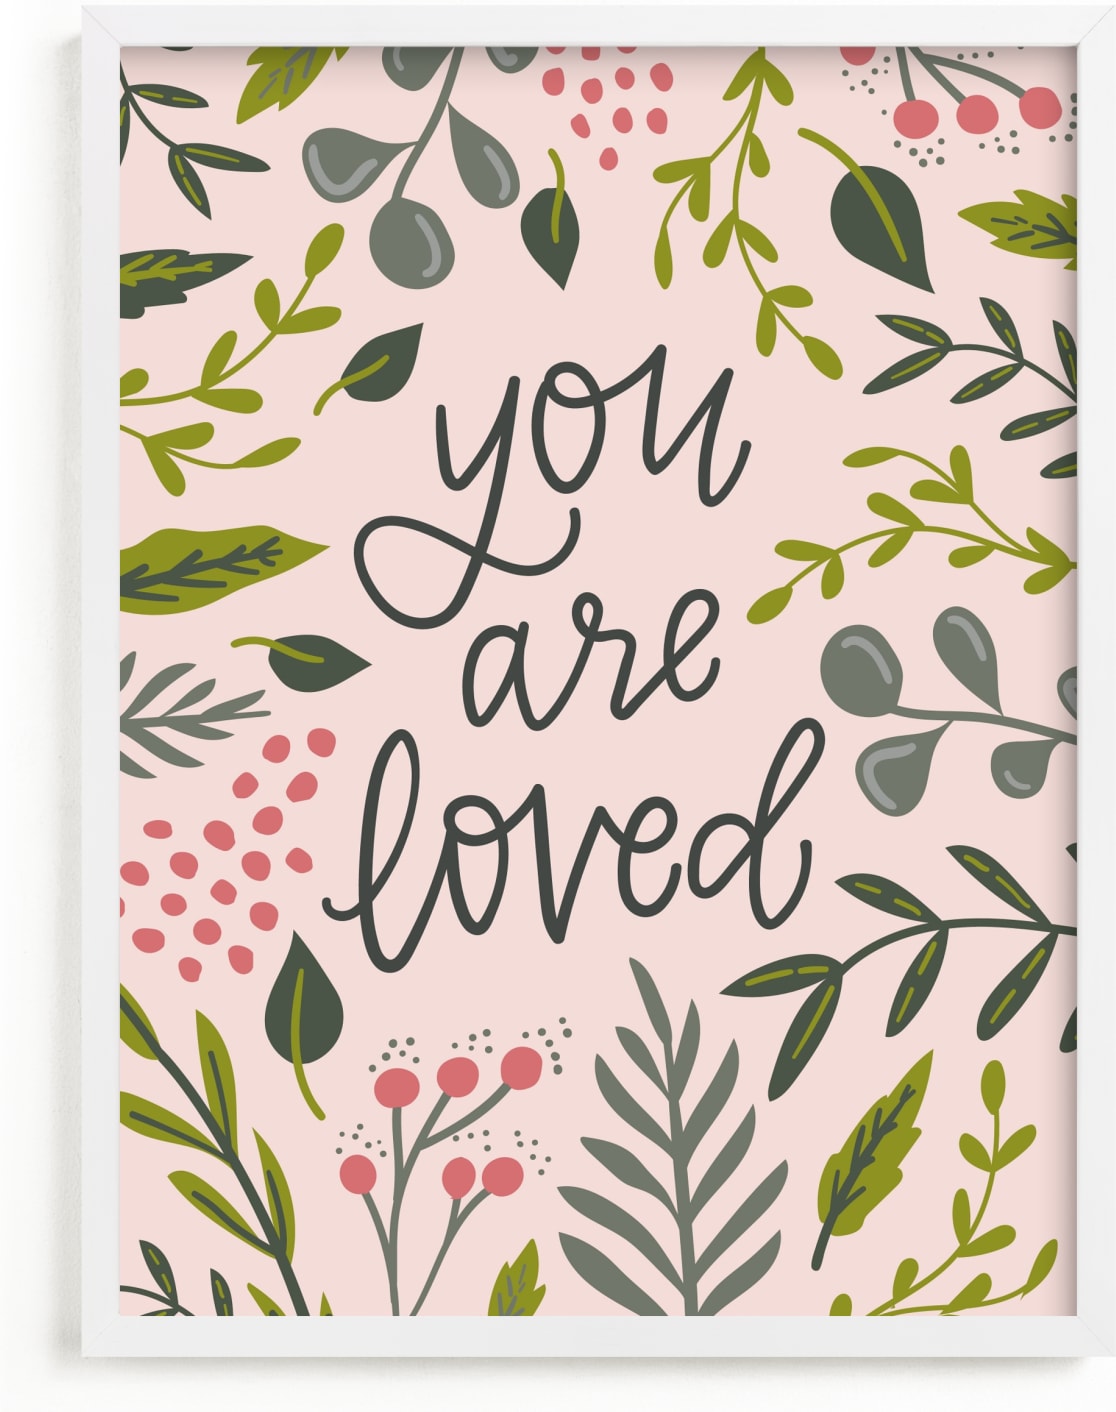 This is a colorful kids wall art by Alexa Zurcher called You Are Loved - Floral.